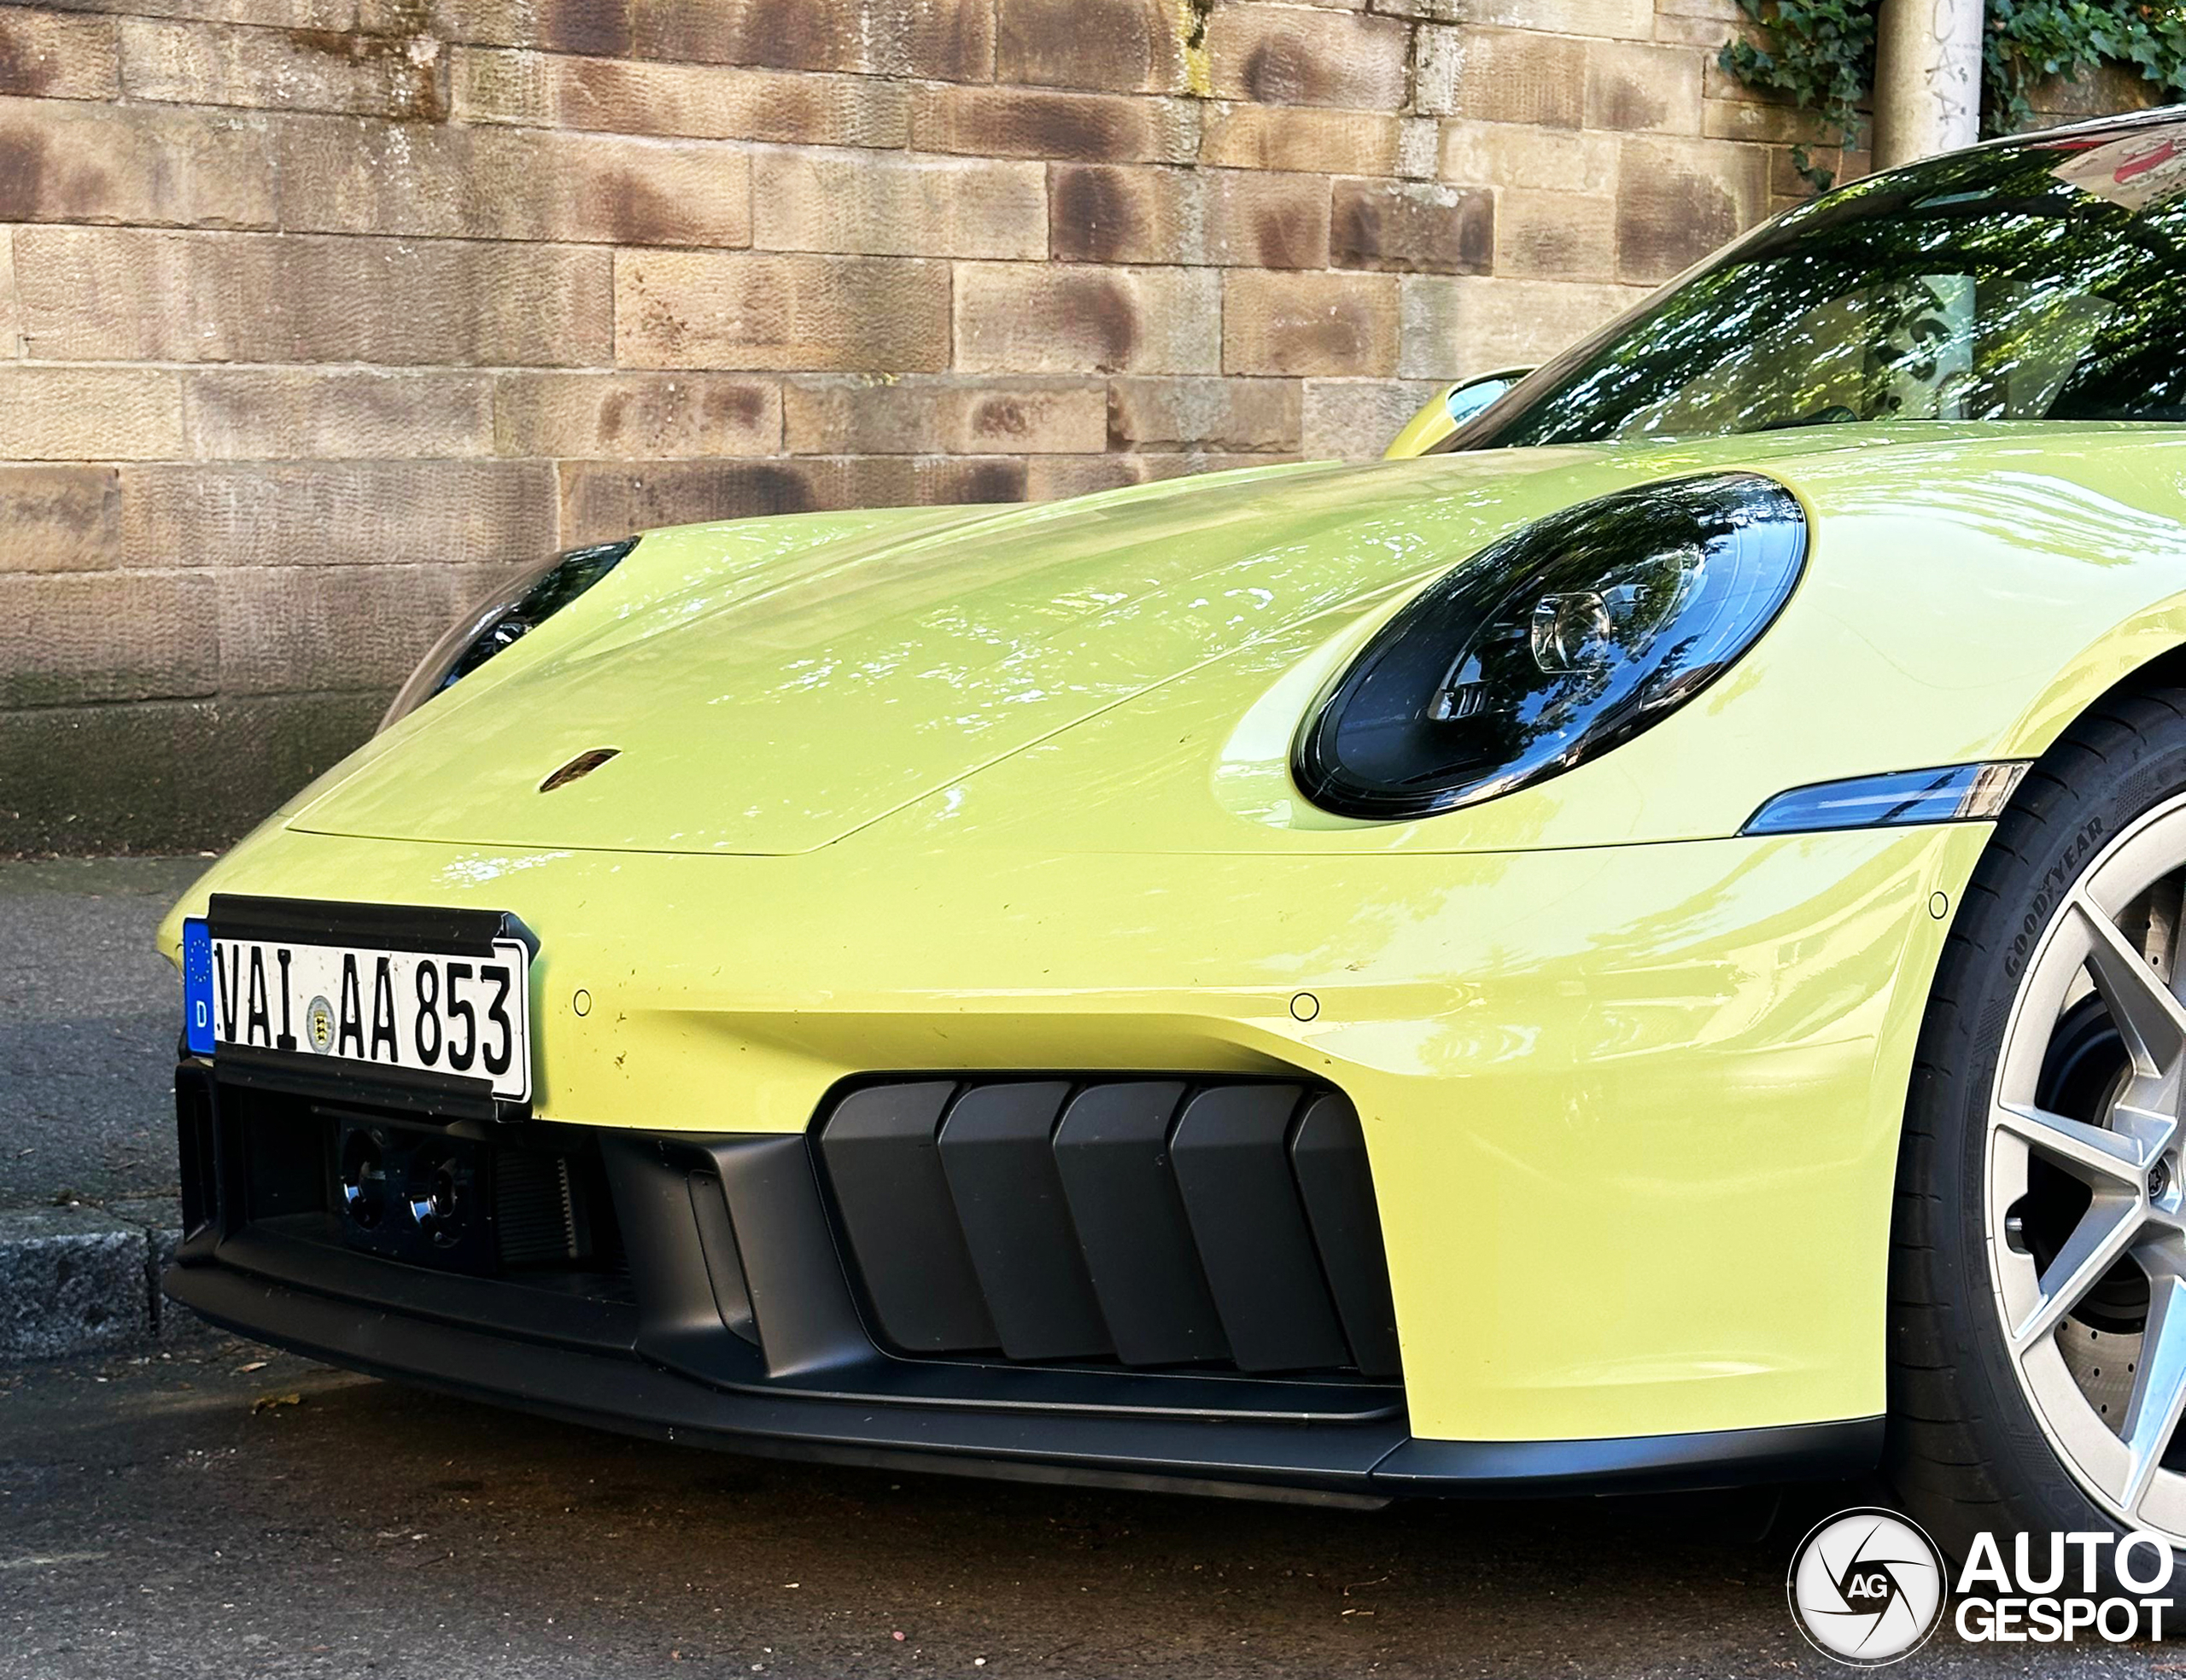 This is the first 992 MkII without camouflage